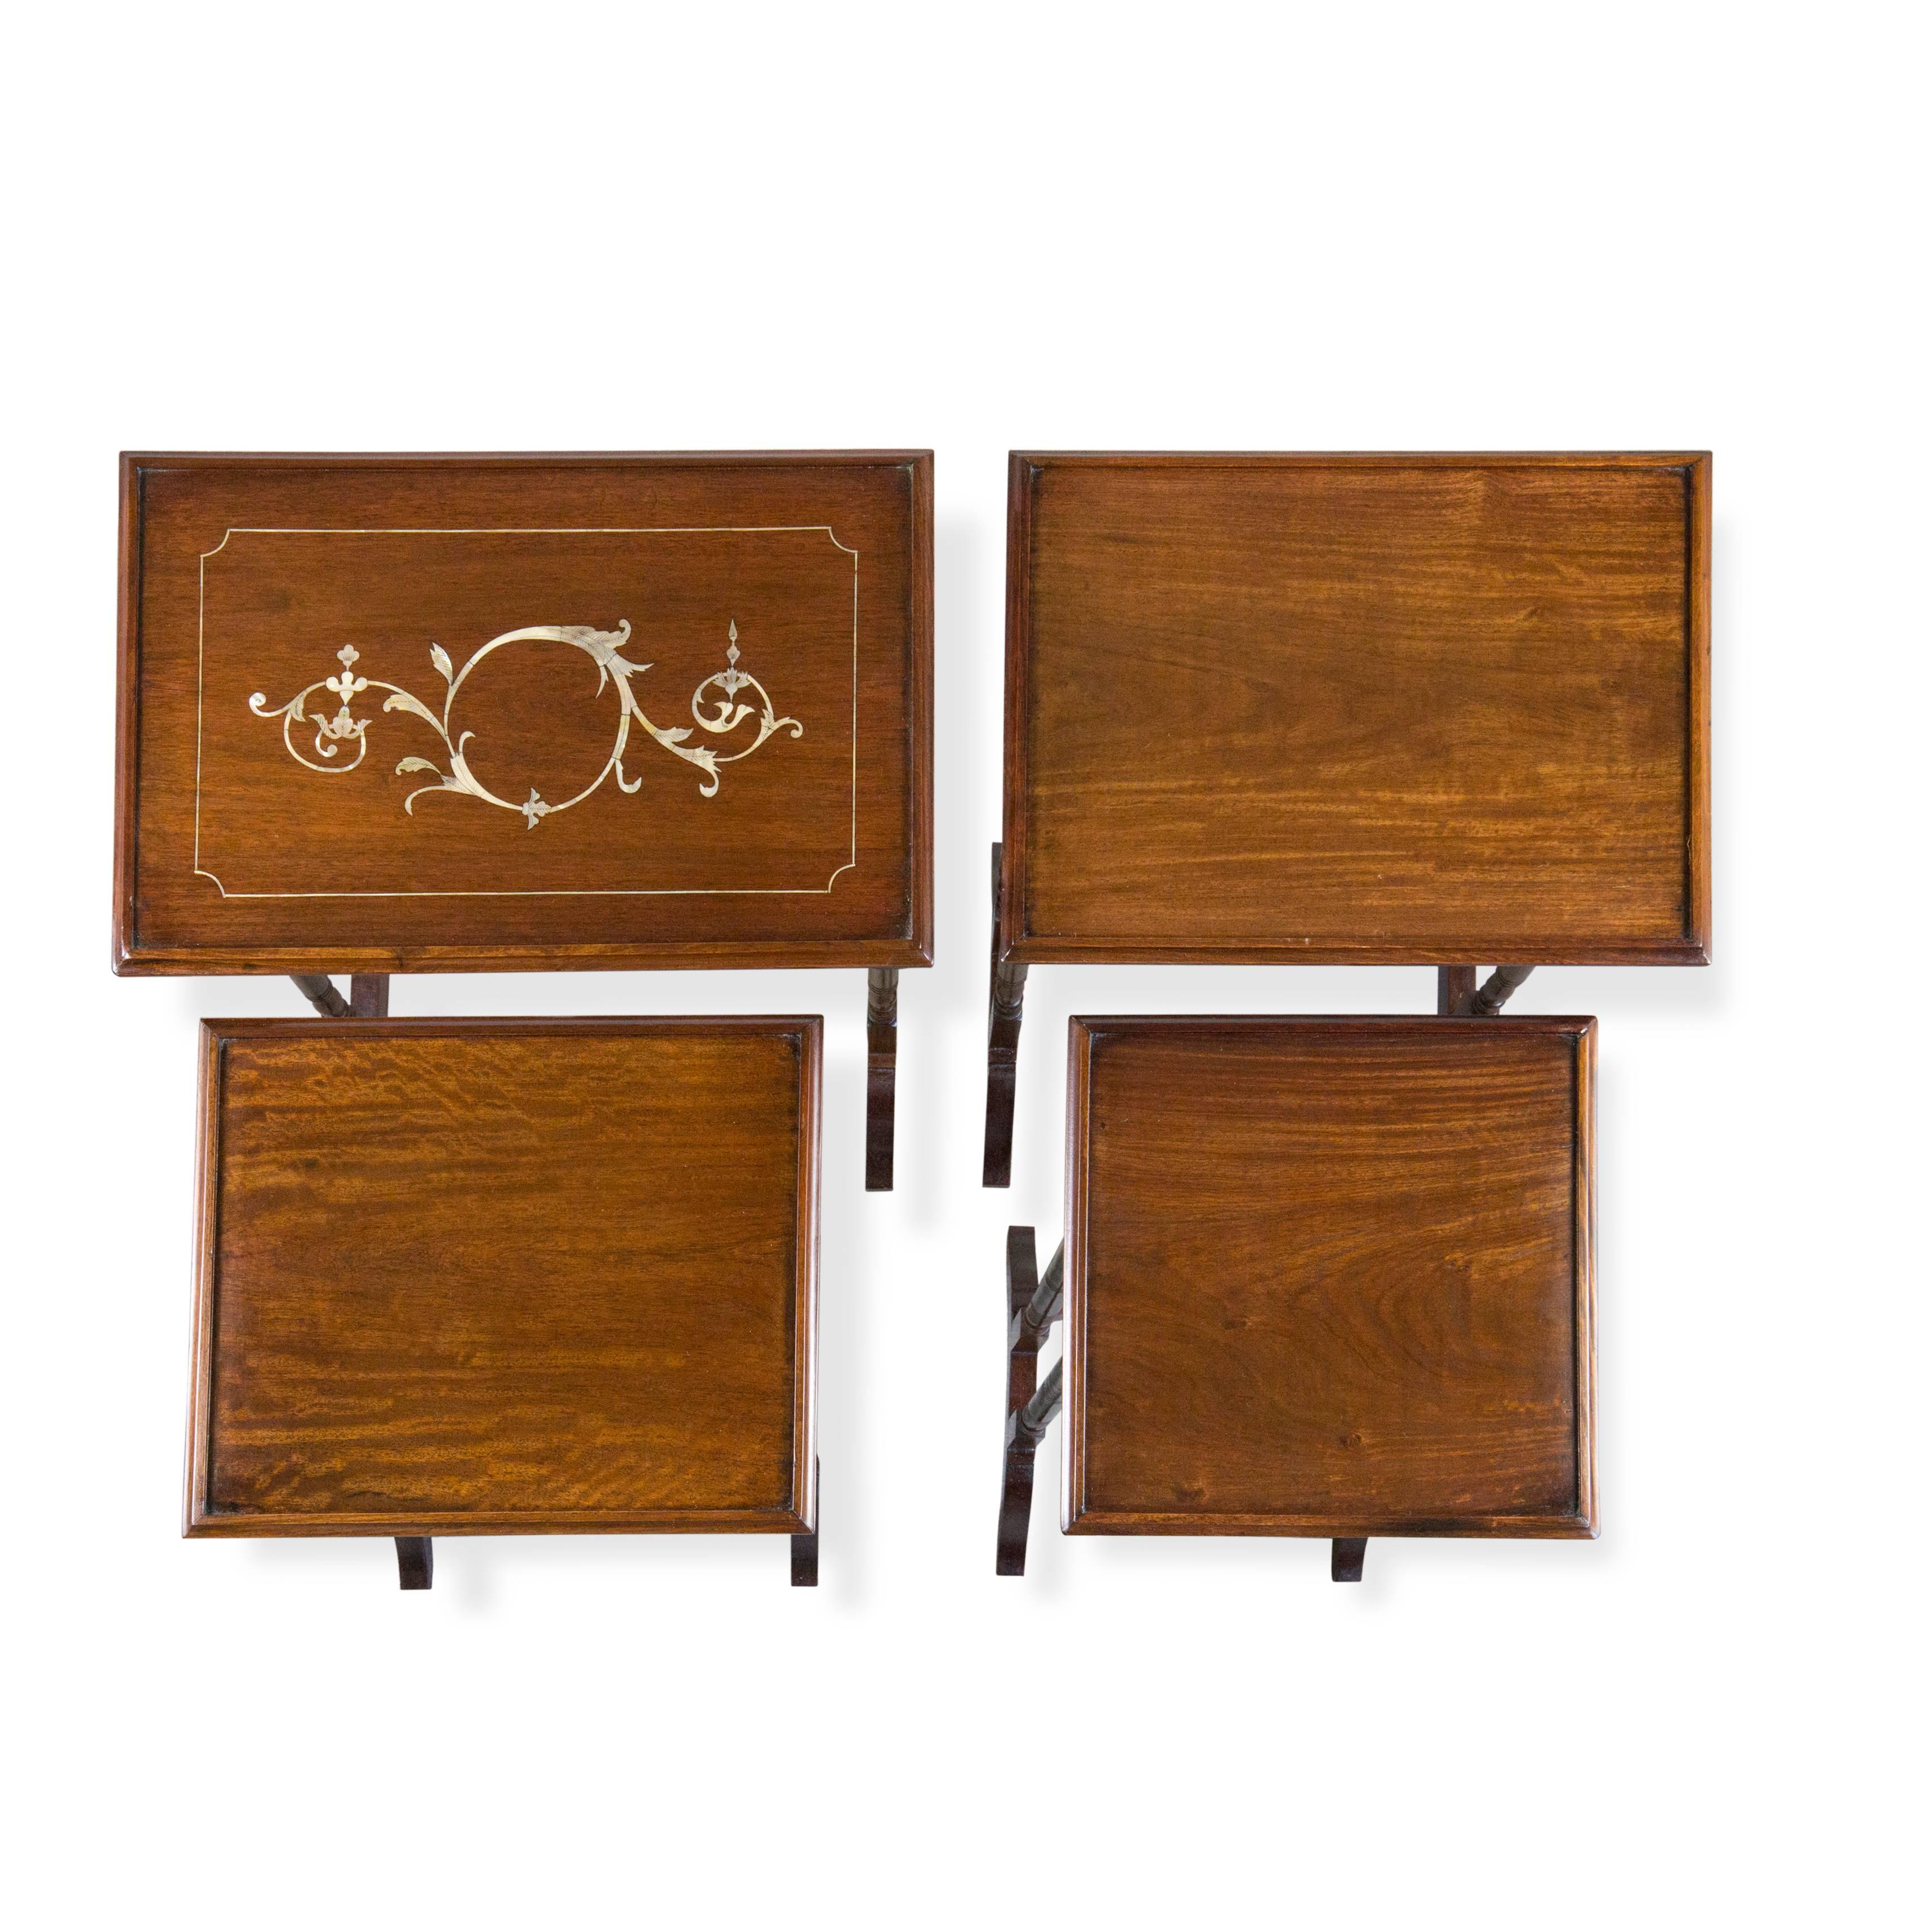 20th Century Anglo-Indian Nest of Four Tables